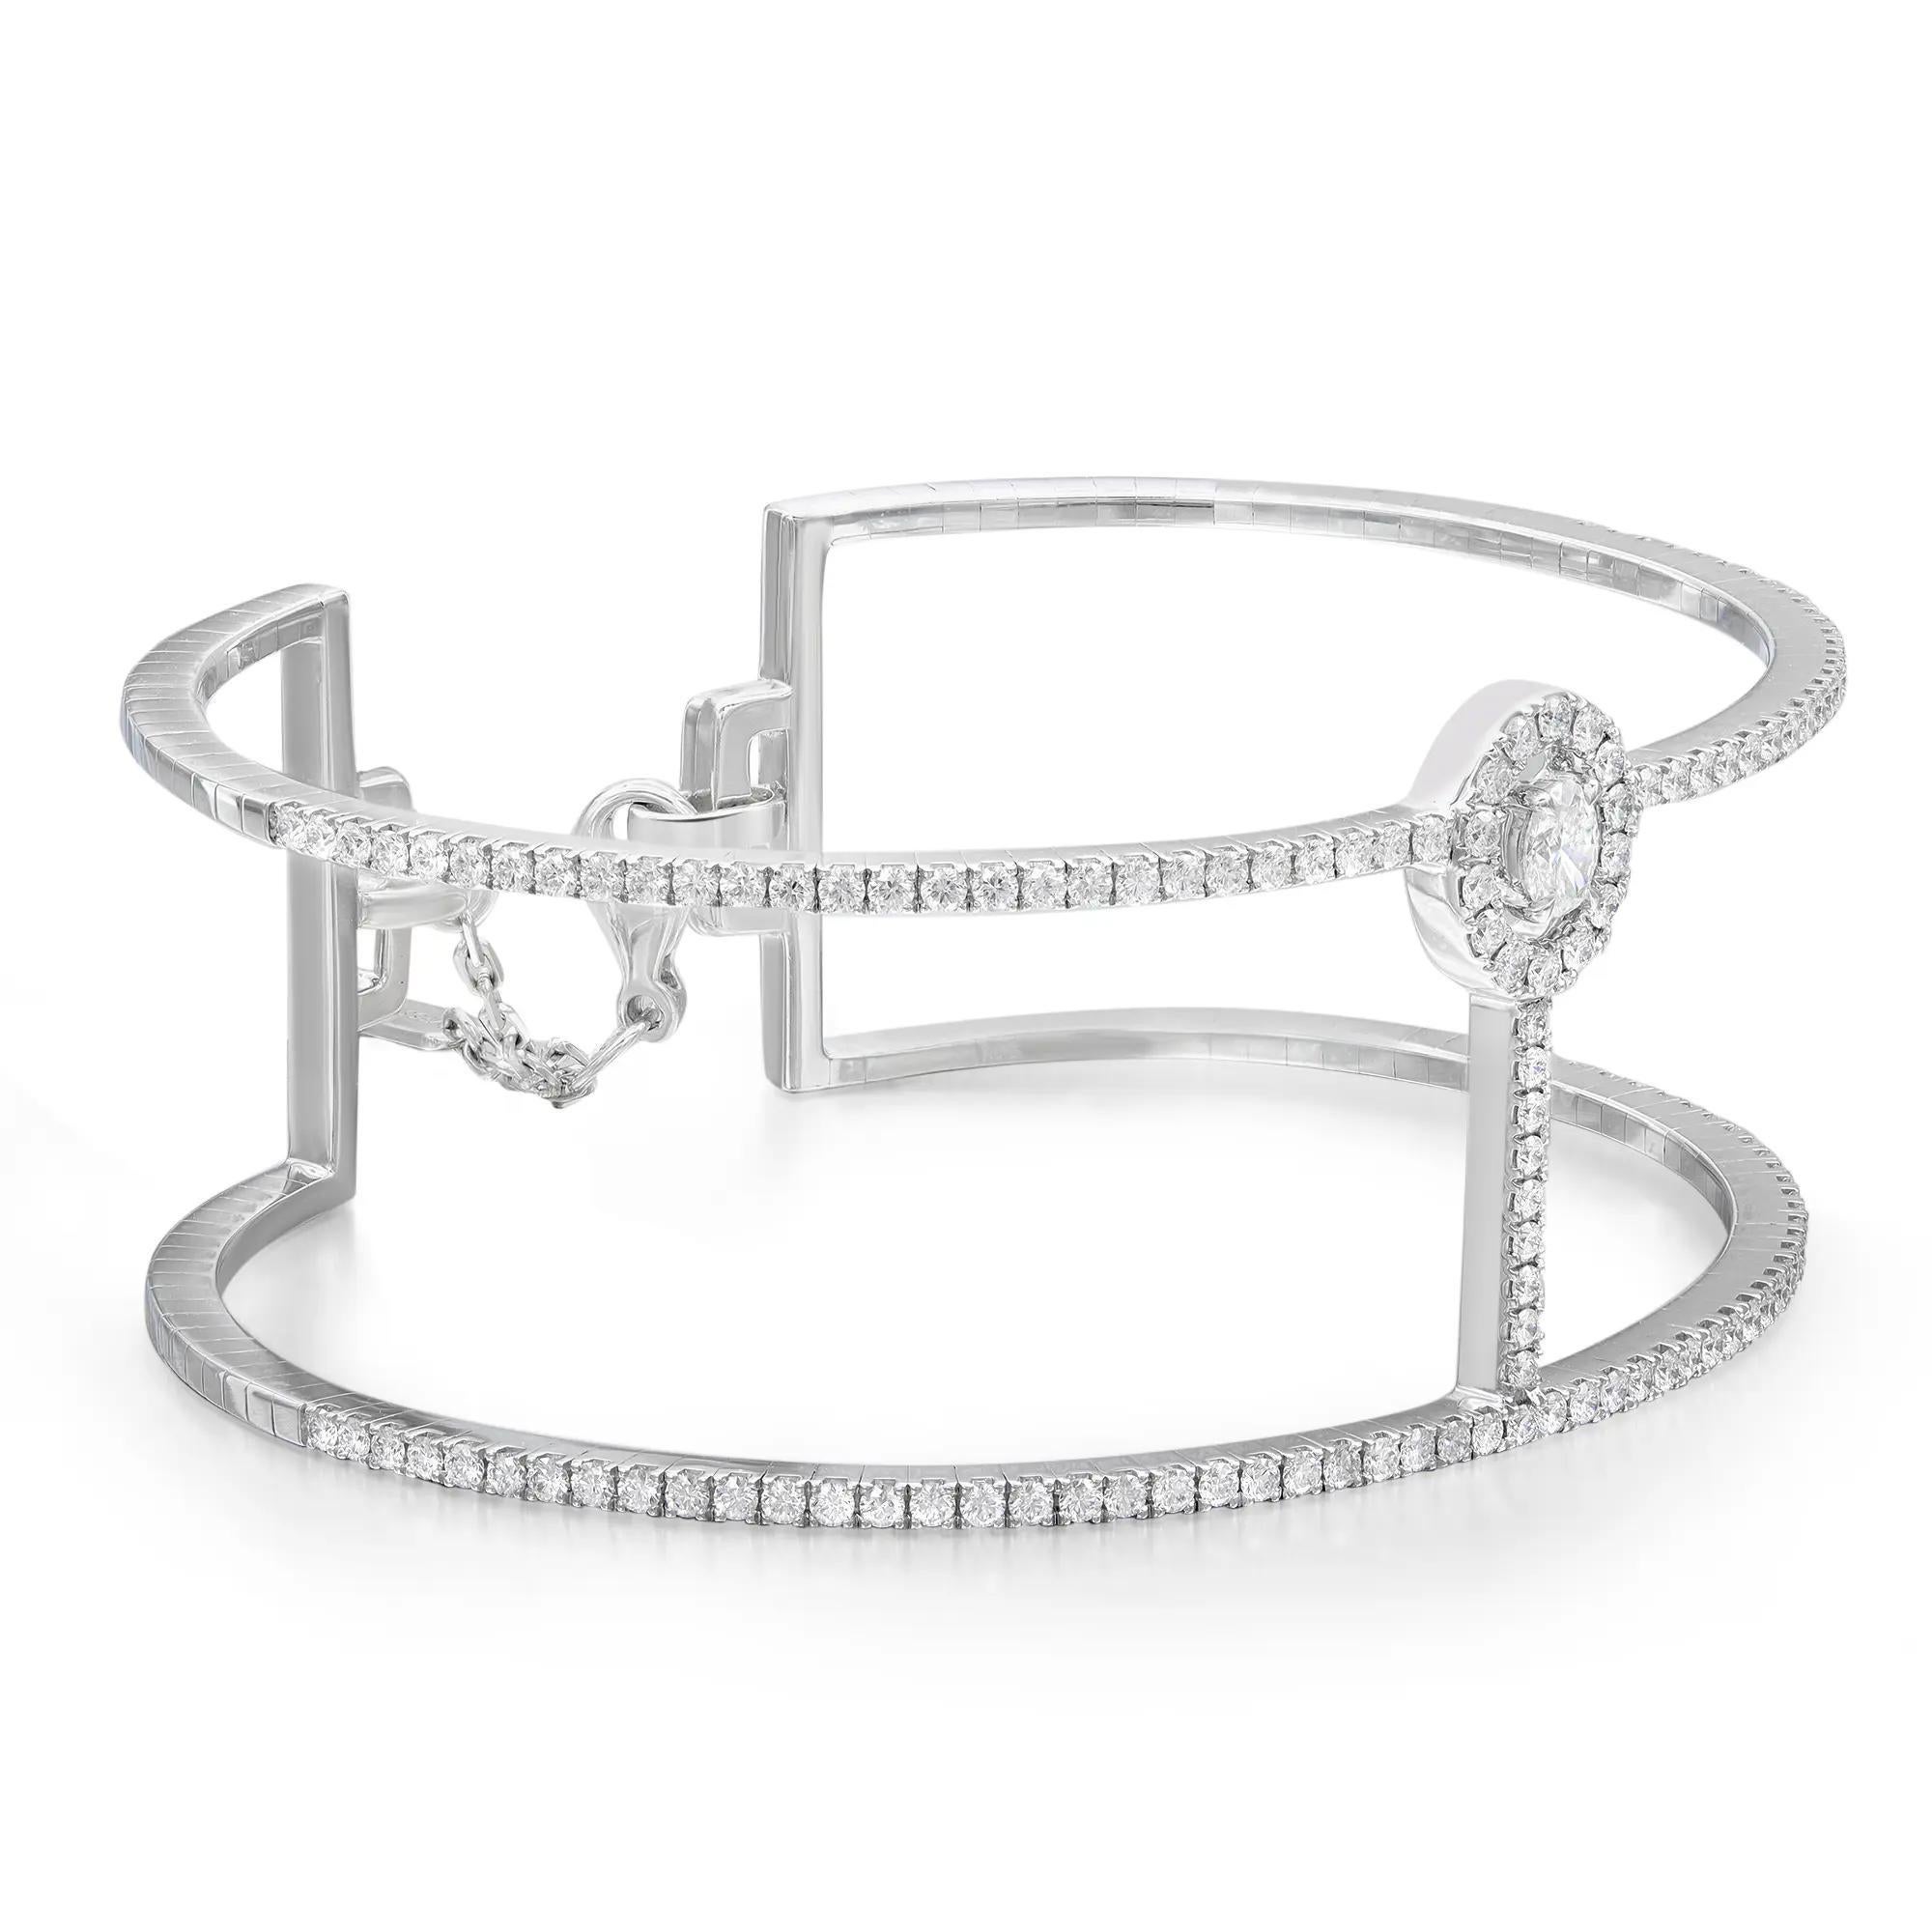 Add a touch of sparkle to your wrist with this gorgeous Messika Manch Glam'Azone diamond 2 rows cuff bracelet. Crafted in lustrous 18K white gold. It features center prong set oval cut diamond accented with round brilliant cut diamonds halfway